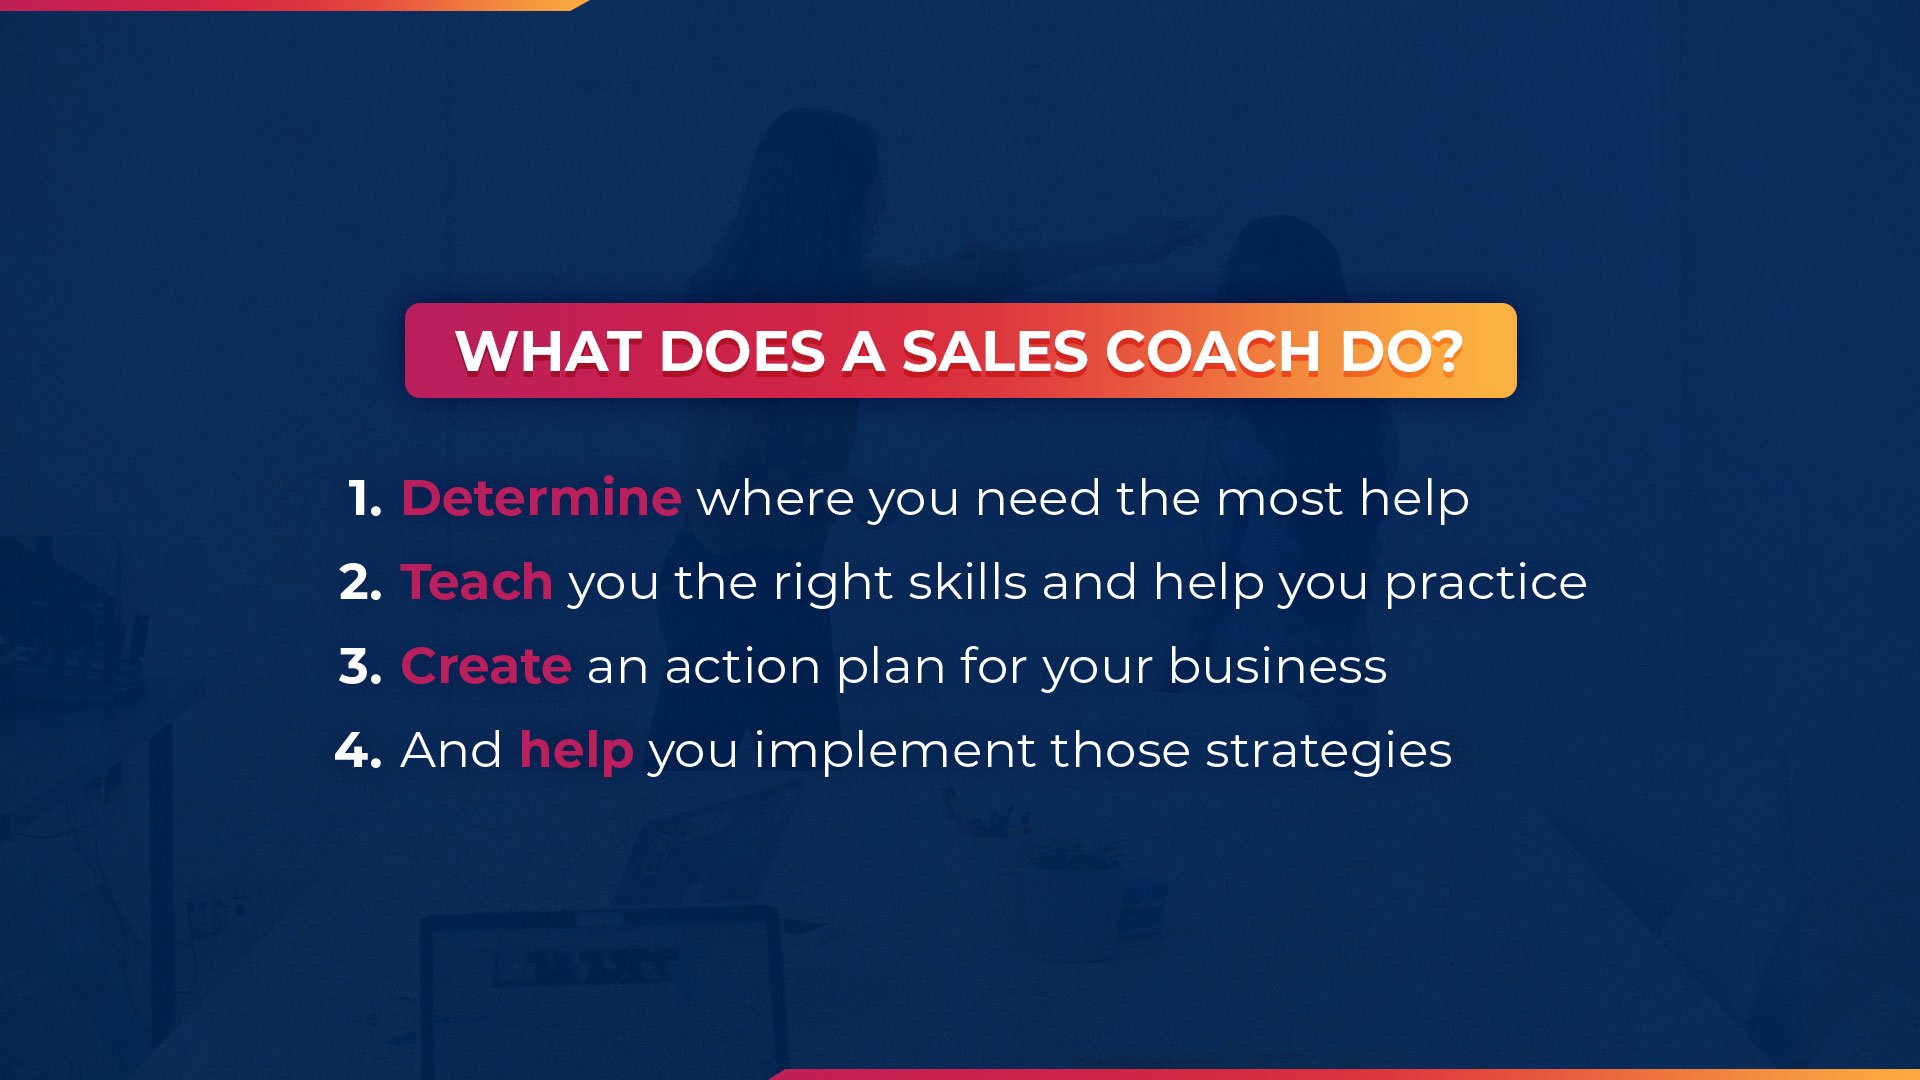 What does a sales coach do?